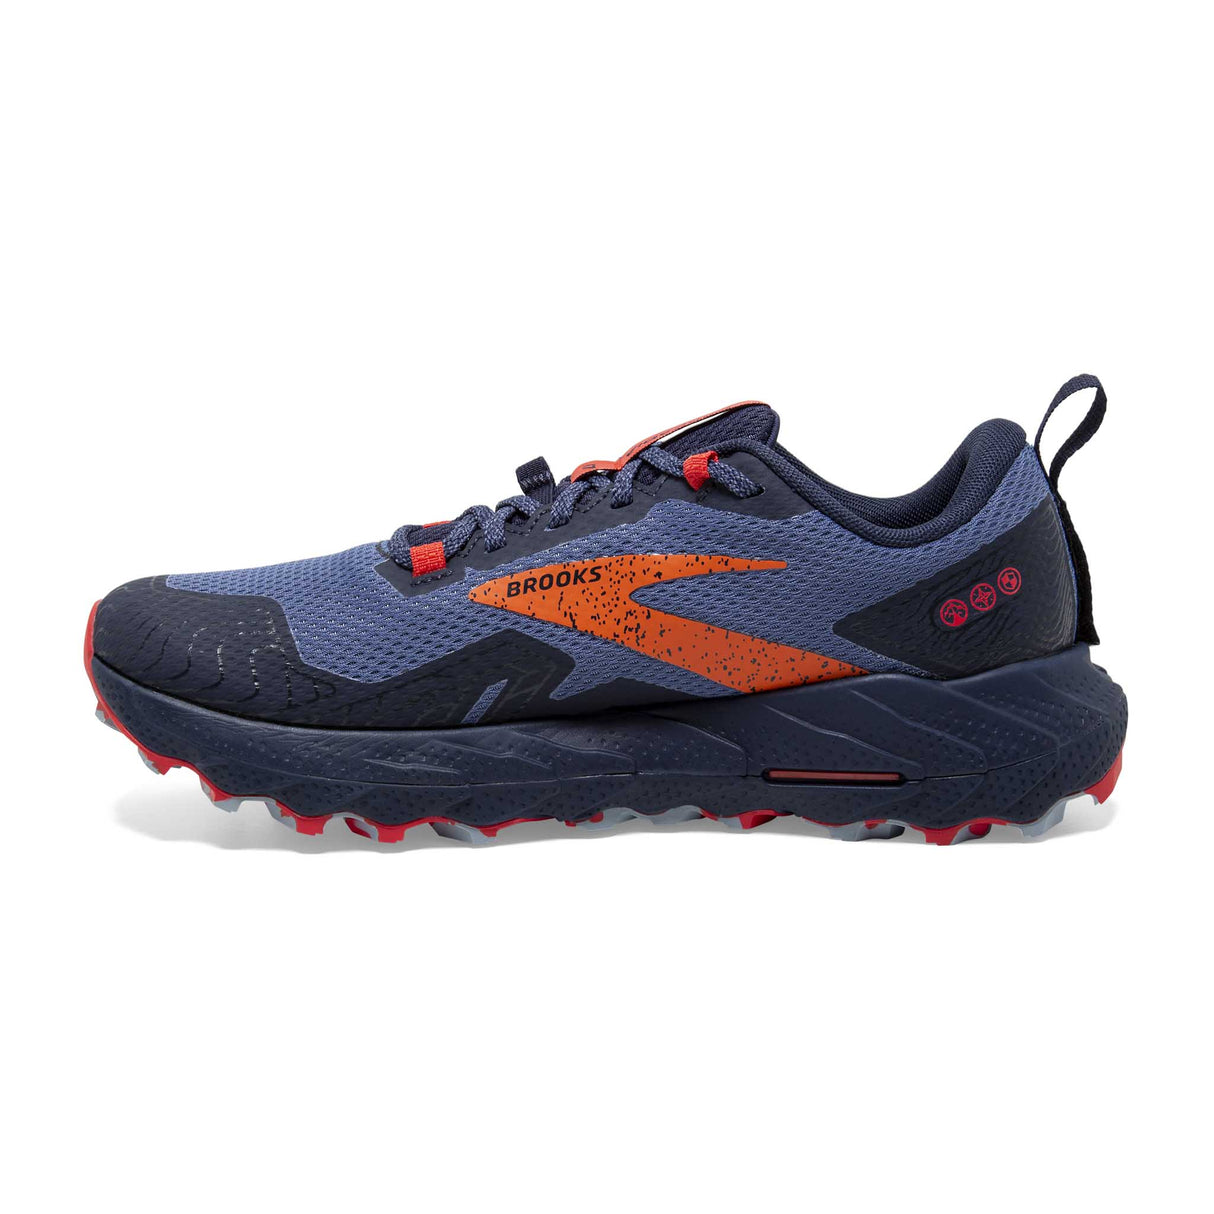 Brooks Cascadia 17 GTX souliers trail running femme lateral- Navy/Bittersweet/Peacoat